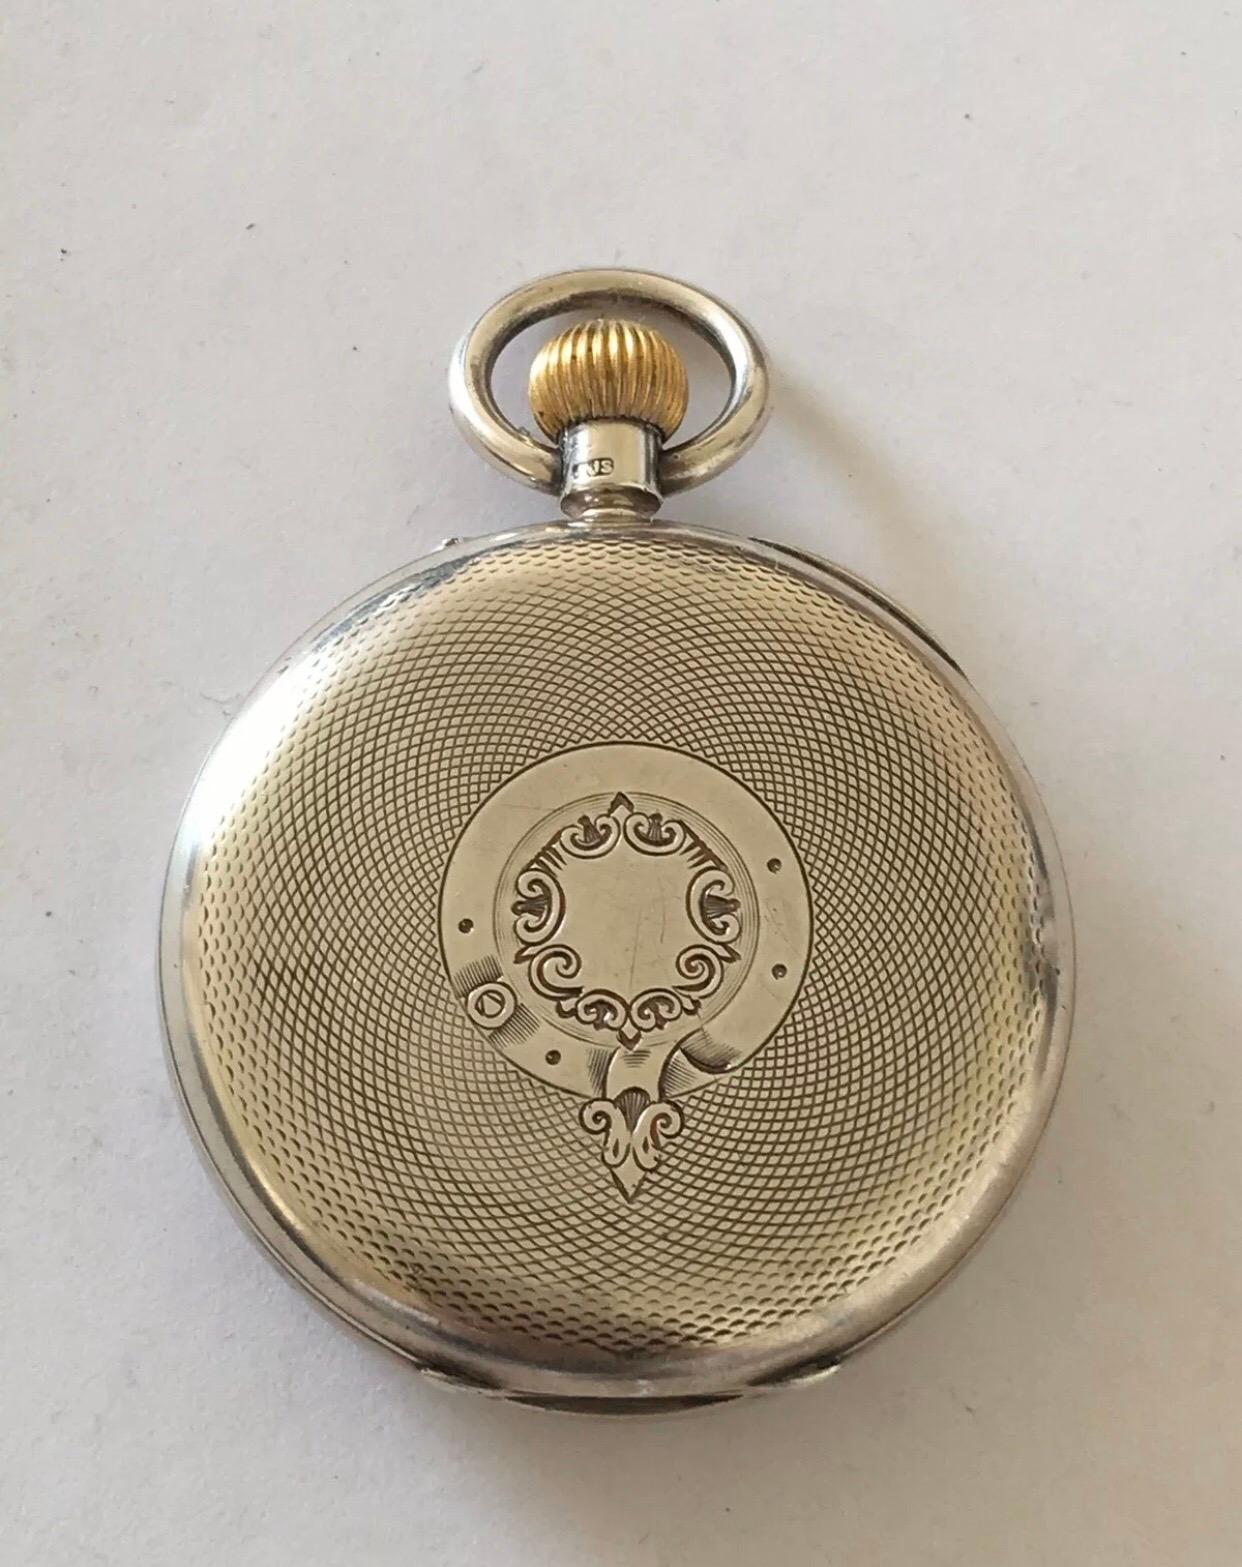 
Mappin & Webb Silver Pocket Watch.

This Exceptional quality antique pocket watch is working and is running well. Visible tiny cracks on the enamel dial as shown. 
Please study the images carefully as form part of the description 